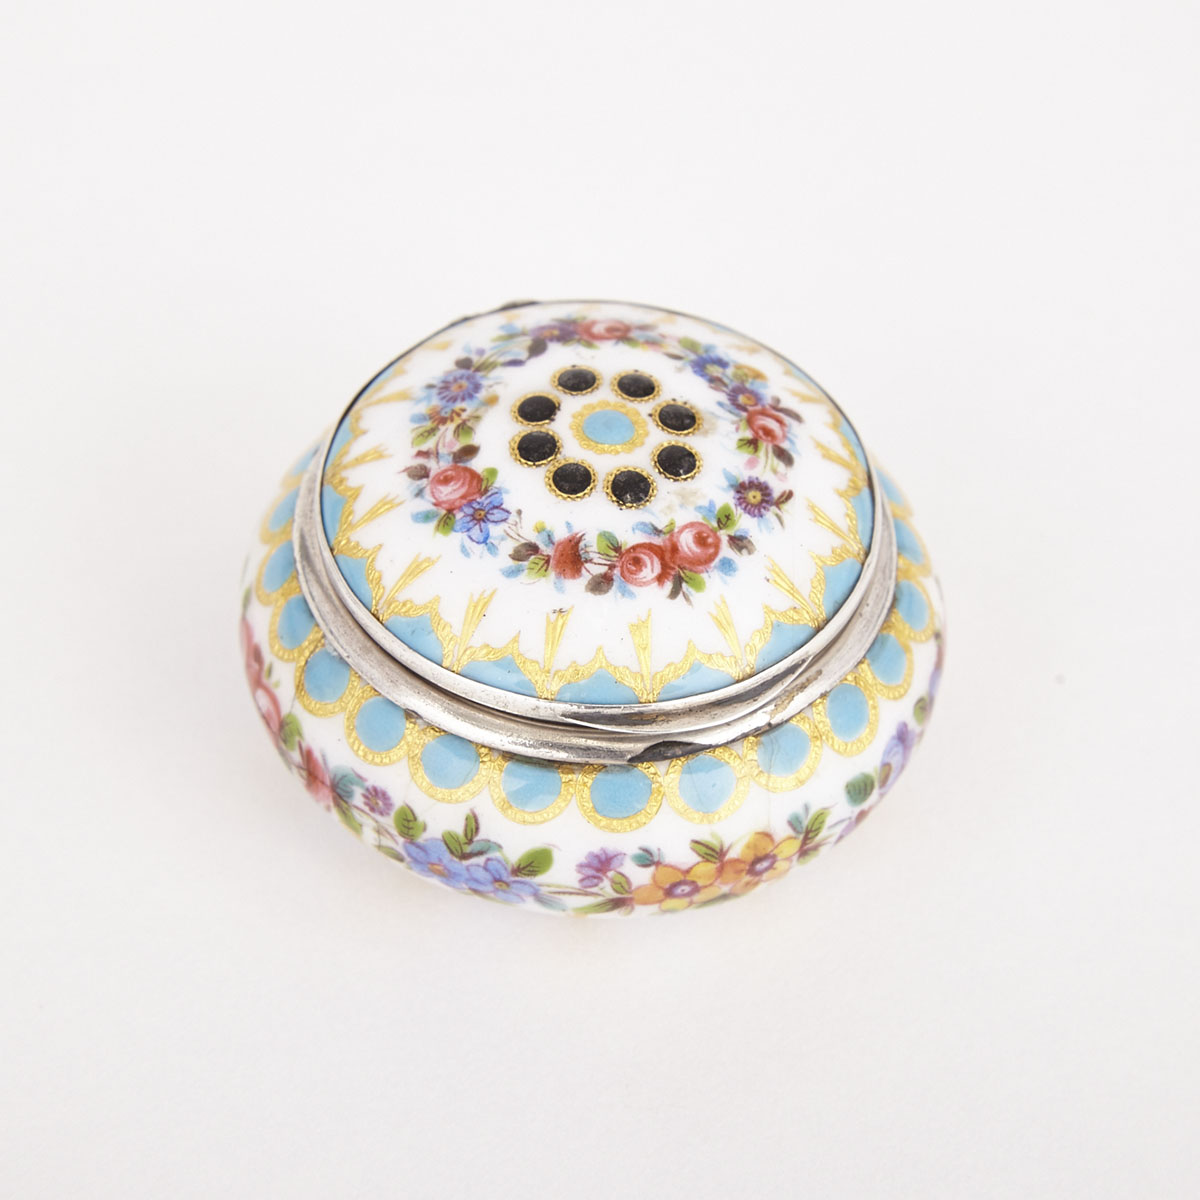 French Silver and Painted Enamel Circular Box, c.1900